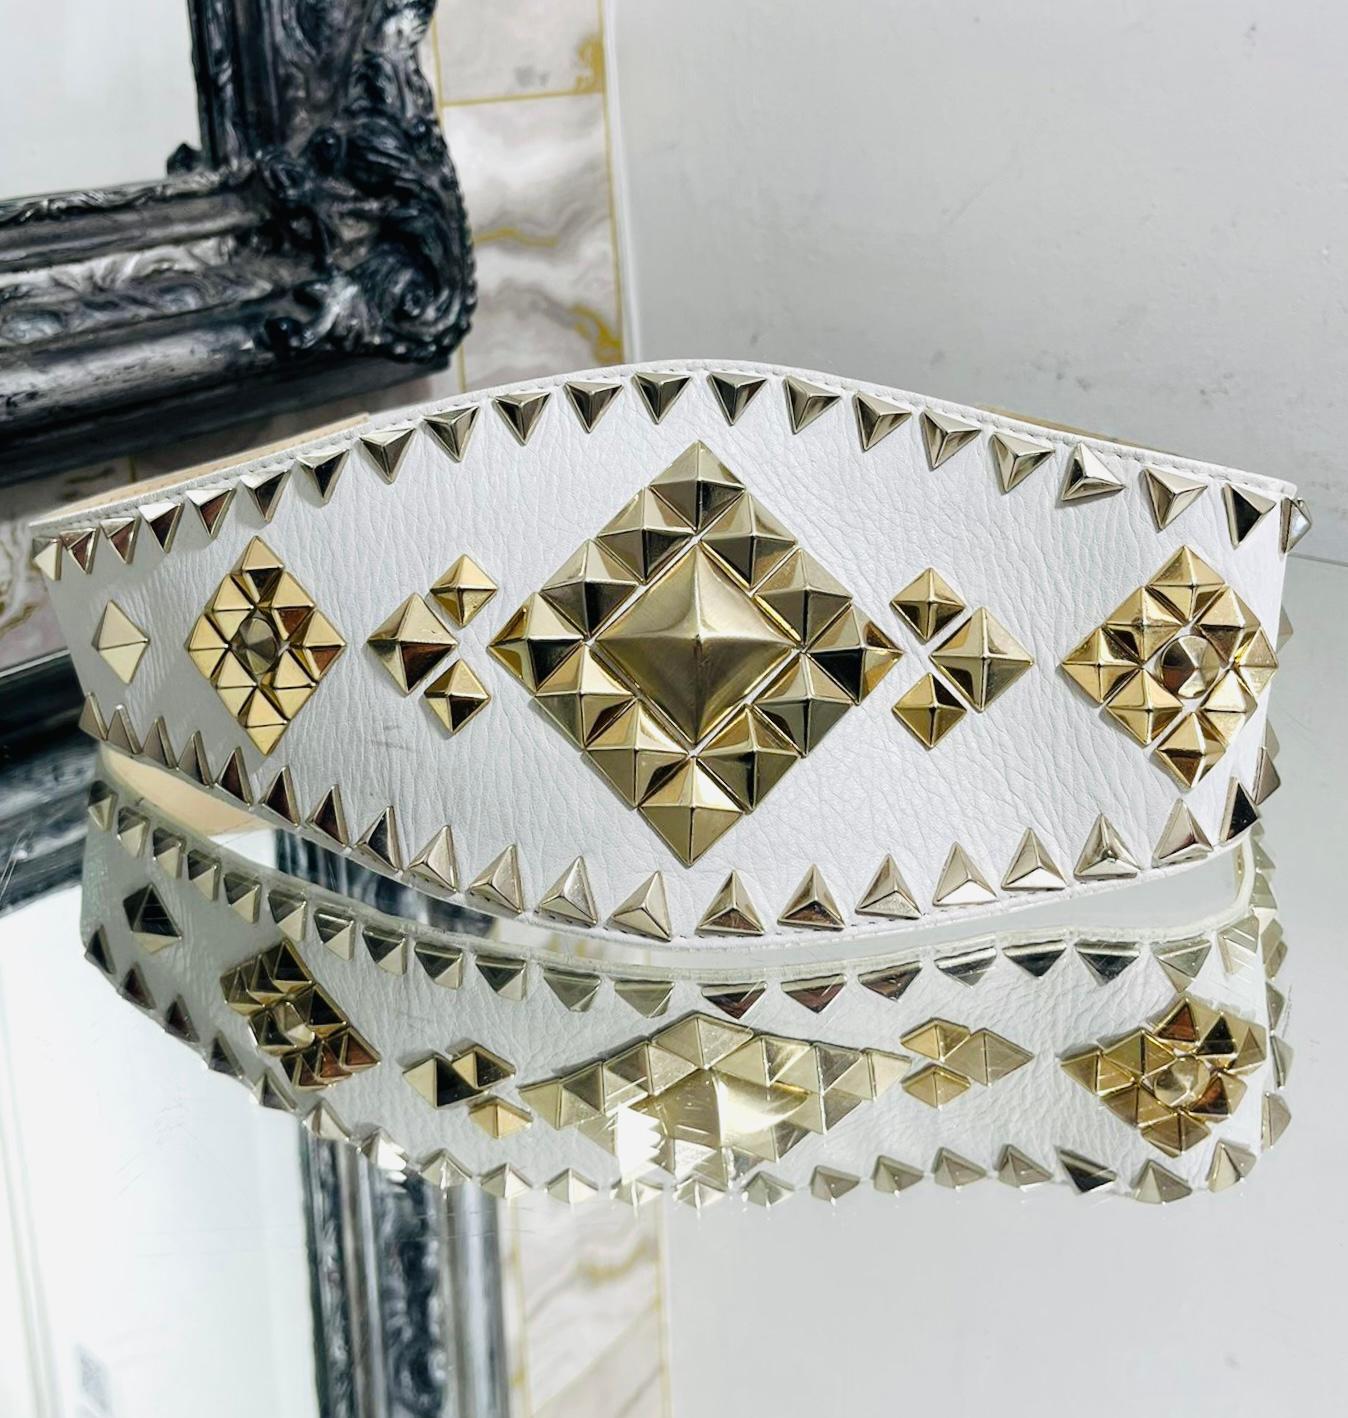 Just Cavalli Stud Embellished Leather Belt

White, wide belt designed with gold pyramid stud adornment to the front.

Detailed with gold 'Just Cavalli' logo engraved plaque to rear.

Featuring quadruple snap button closure.

Size – 87cm

Condition –